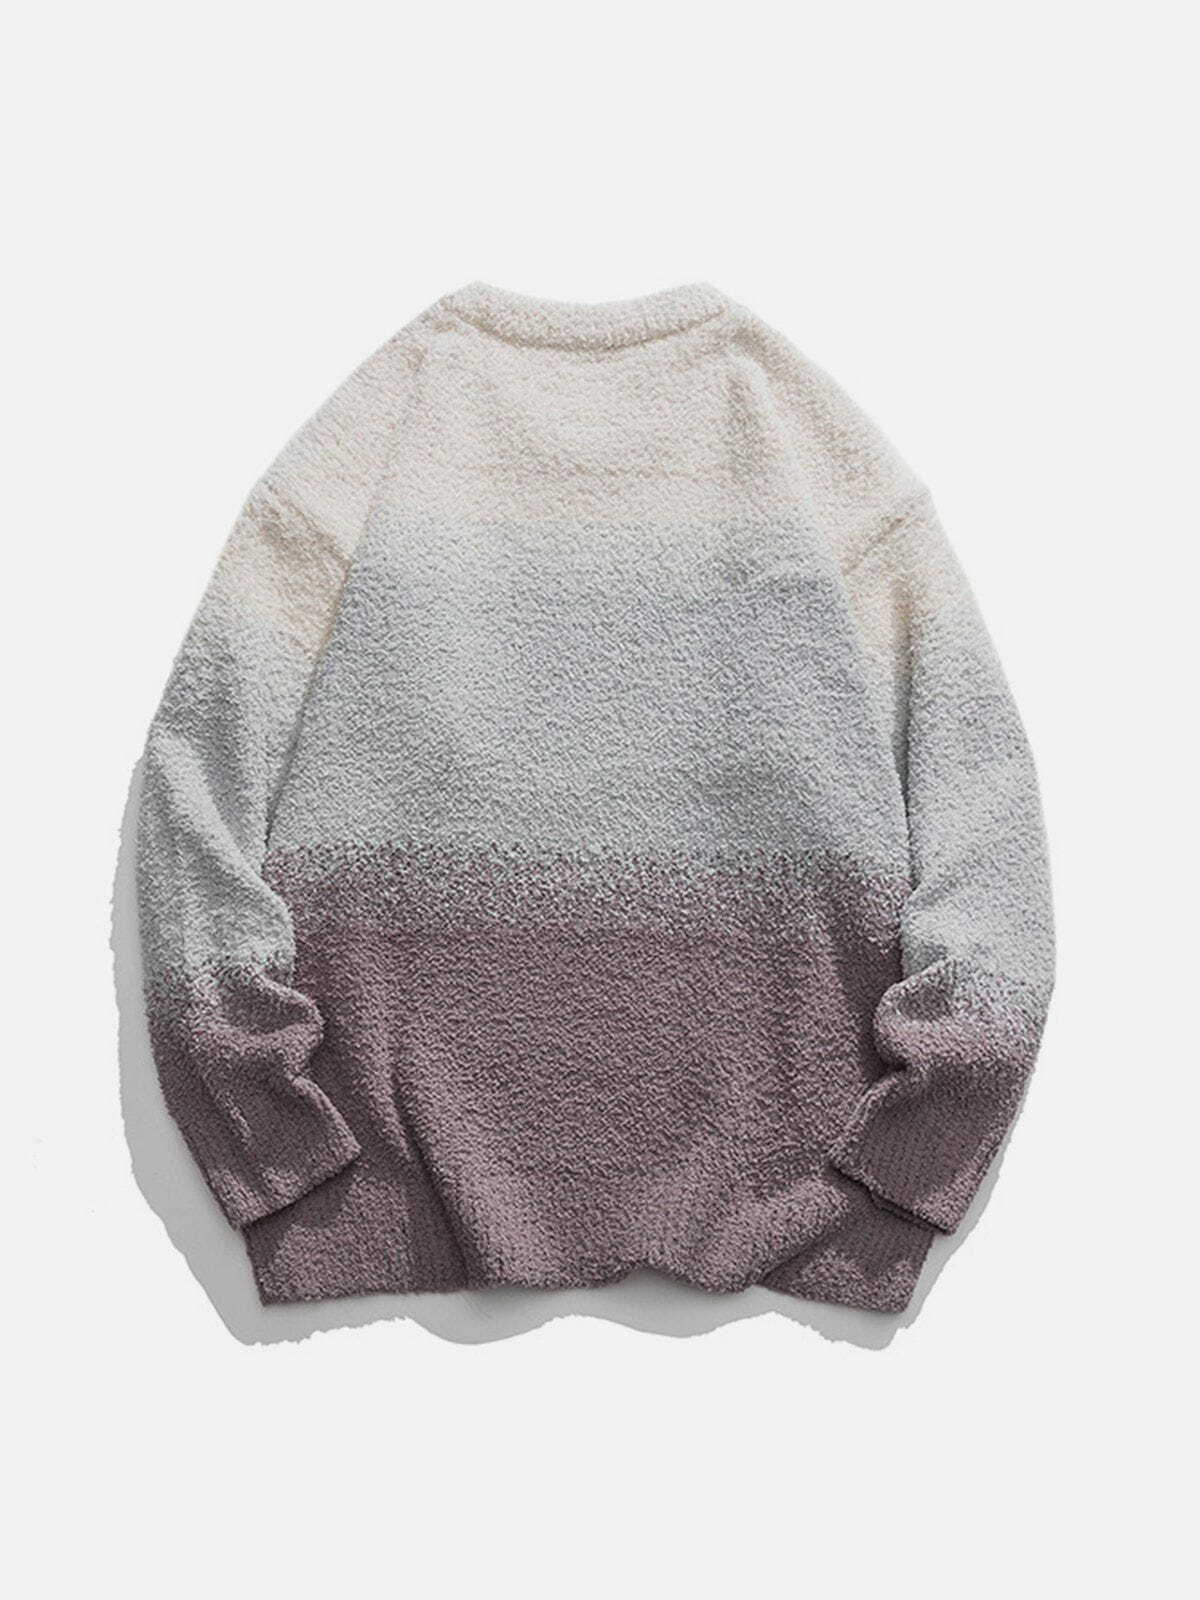 gradient three colour sweater edgy streetwear chic 4480